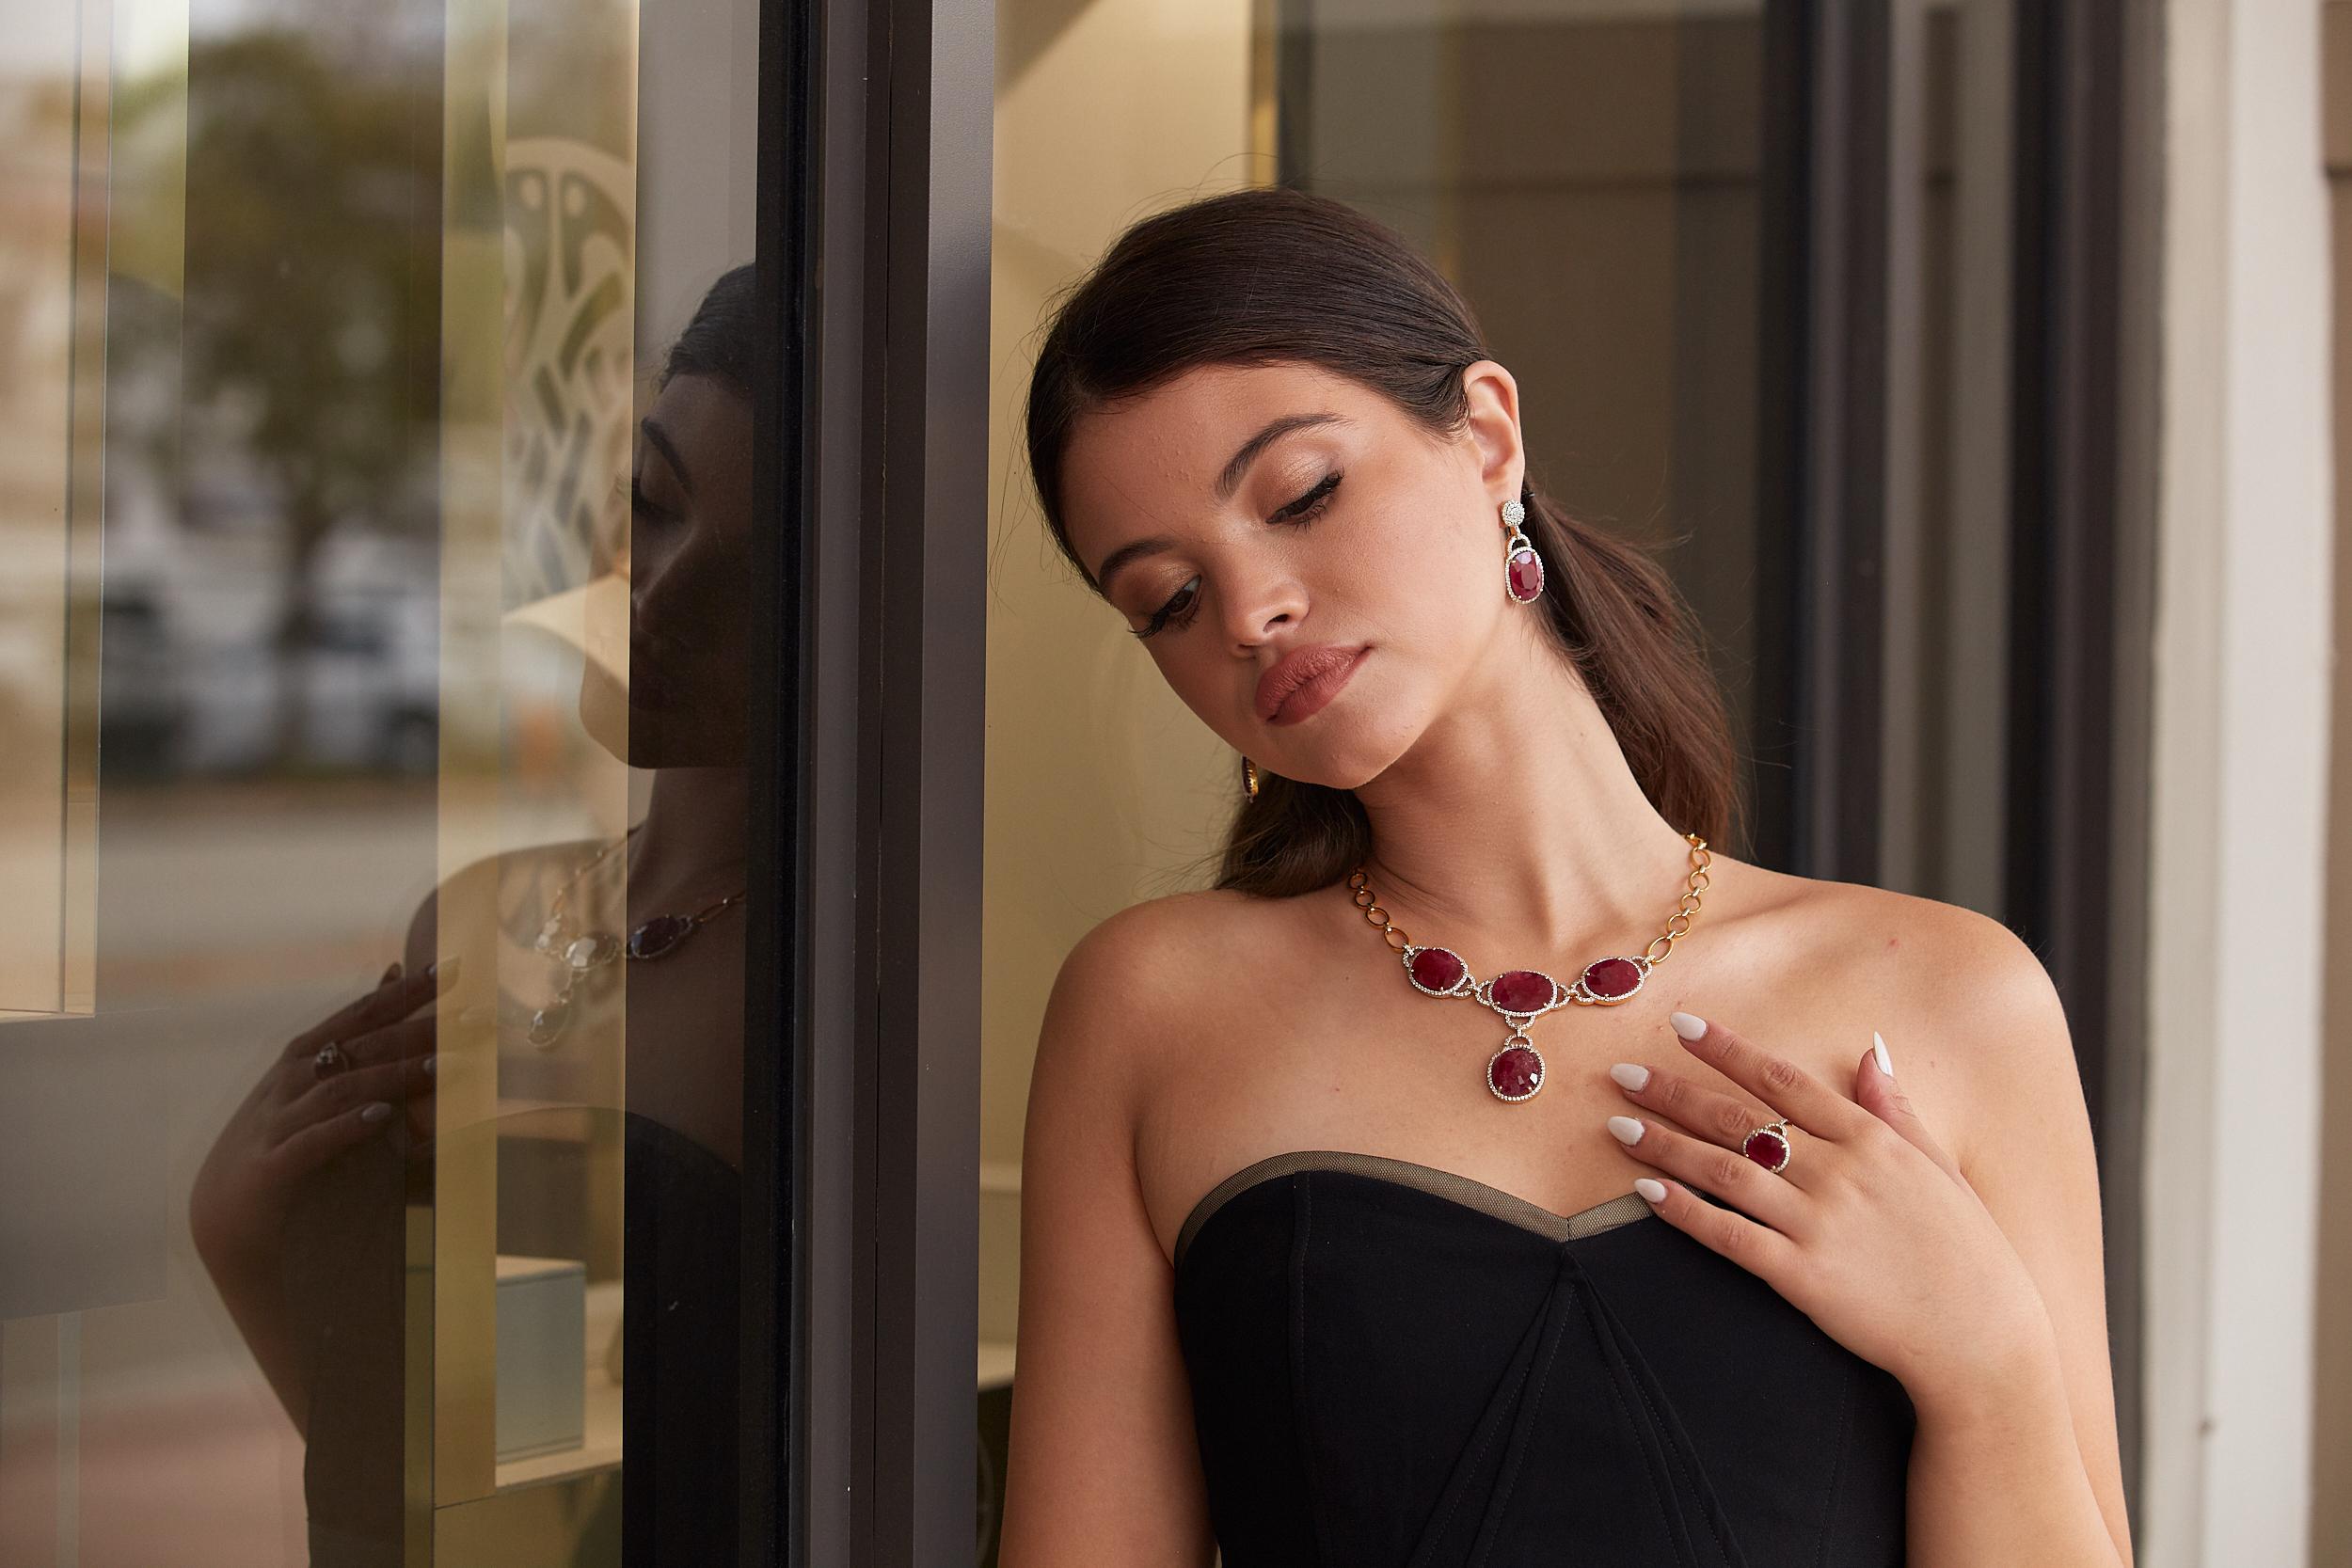 Tresor Beautiful Necklace feature 56.60 total carats of Ruby & 2.19 carats of Diamond. The Necklace is an ode to the luxurious yet classic beauty with sparkly gemstones and feminine hues. Their contemporary and modern design make them perfect and